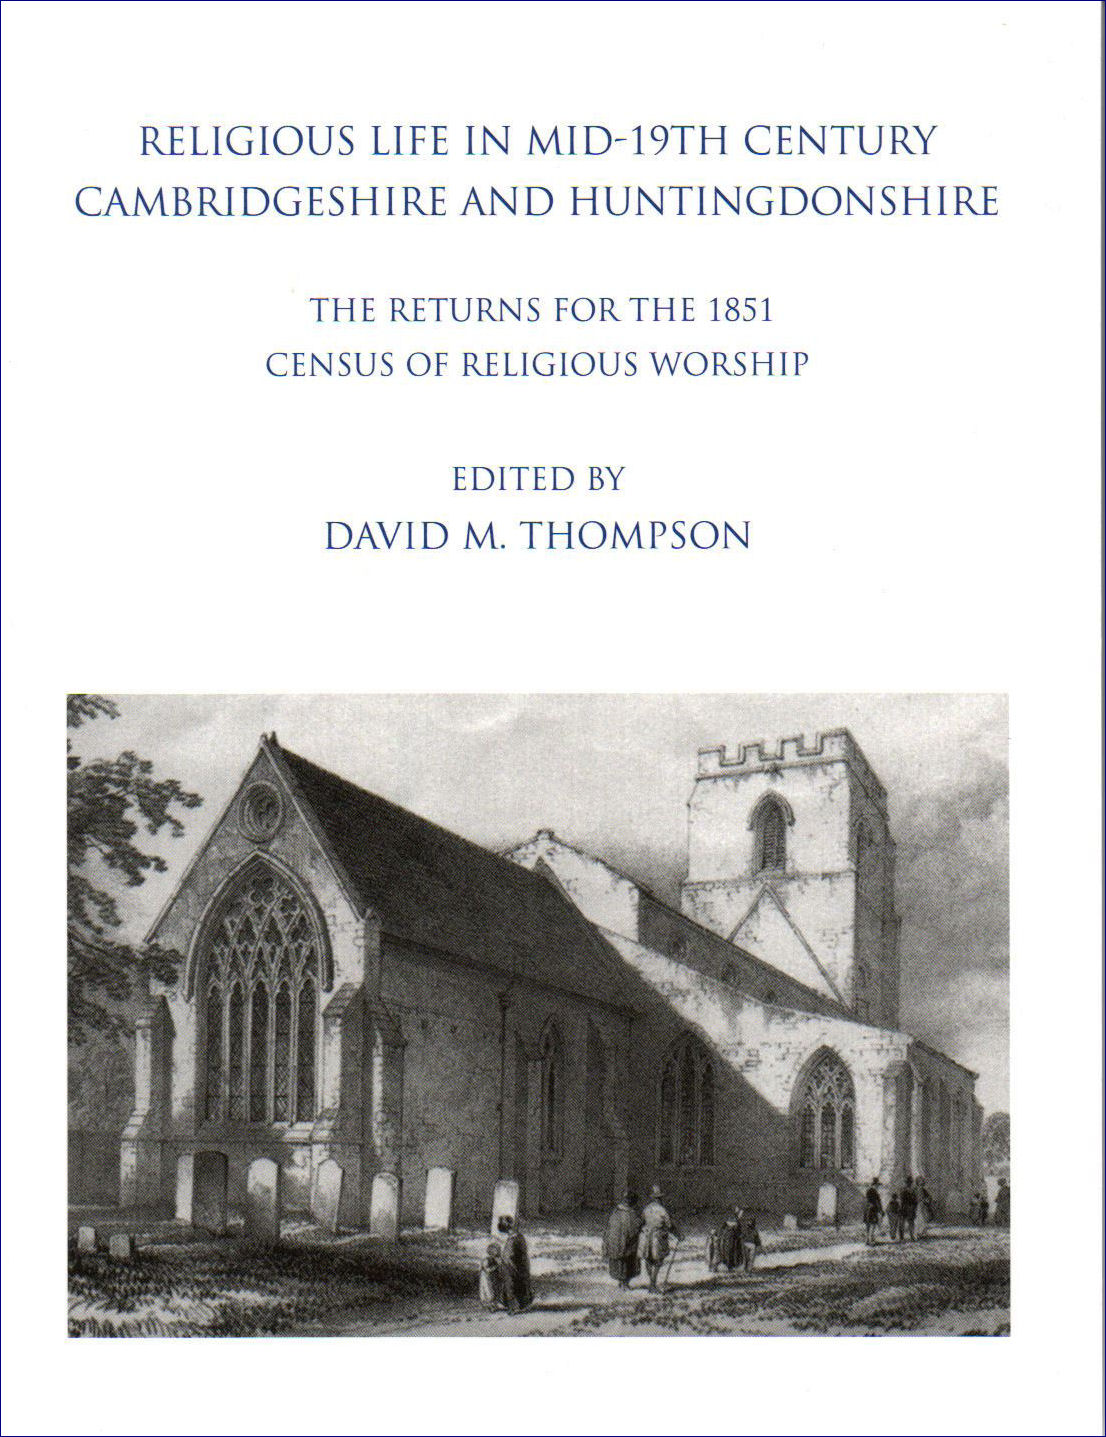 21. Religious Life in Mid-19th Century Cambridgeshire and Huntingdonshire: The Returns for the 1851 Census of Religious Worship. Edited by David M. Thompson